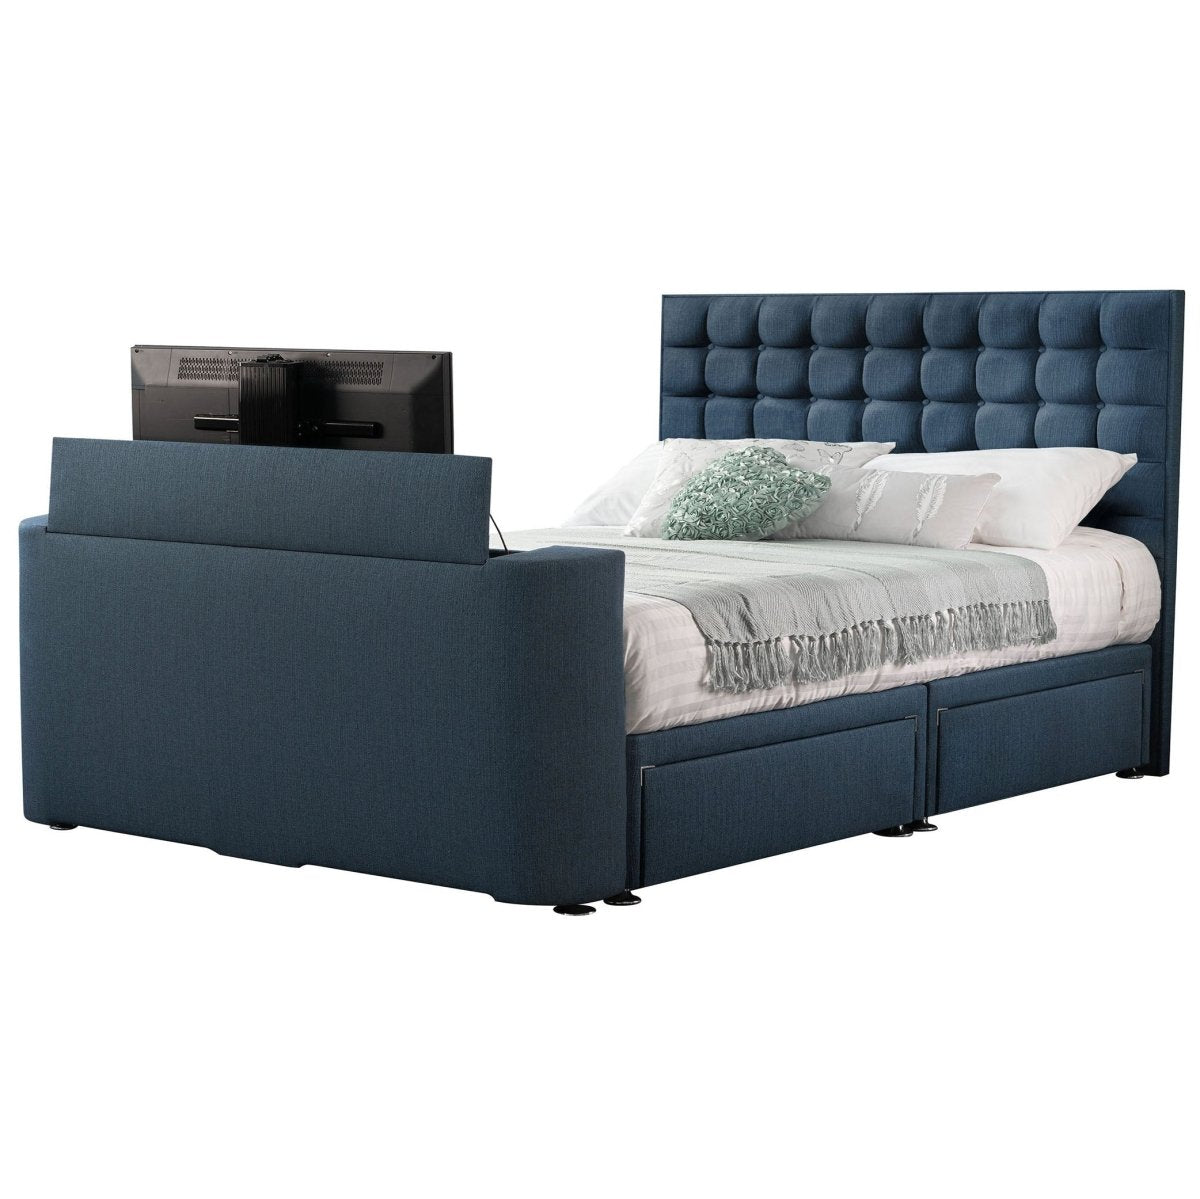 Image Classic TV Bed with Storage Options - Sweet Dreams - TV Beds Northwest - INIMA-CLA-135PT4DCHATS OYSTER - choose your colour tvbed - doubletvbed